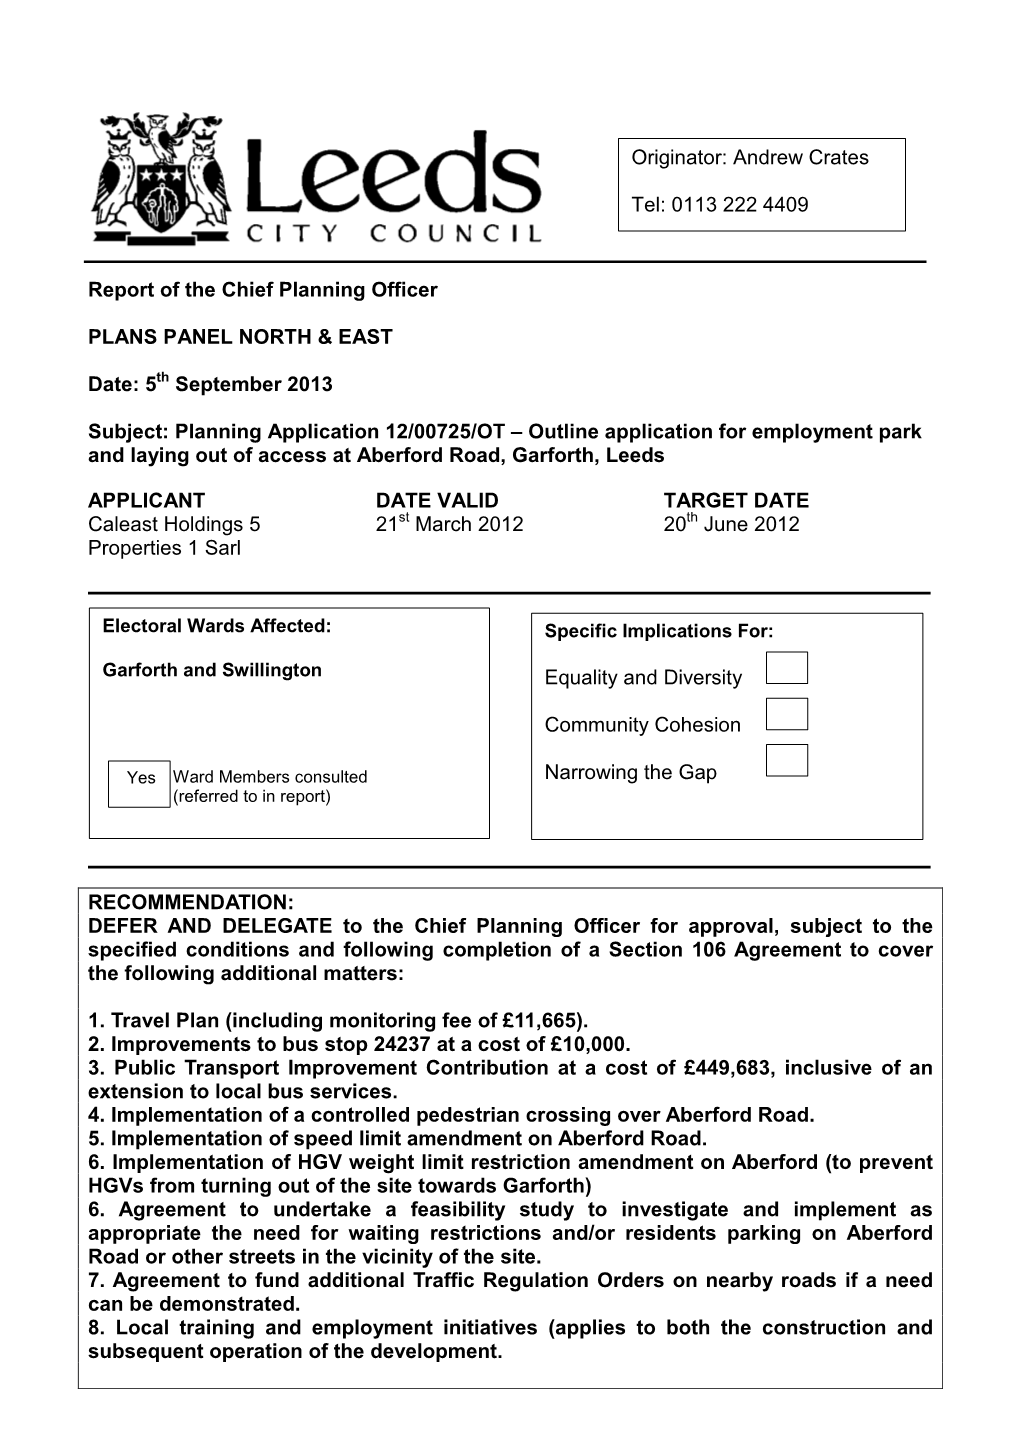 Planning Application 12/00725/OT – Outline Application for Employment Park and Laying out of Access at Aberford Road, Garforth, Leeds